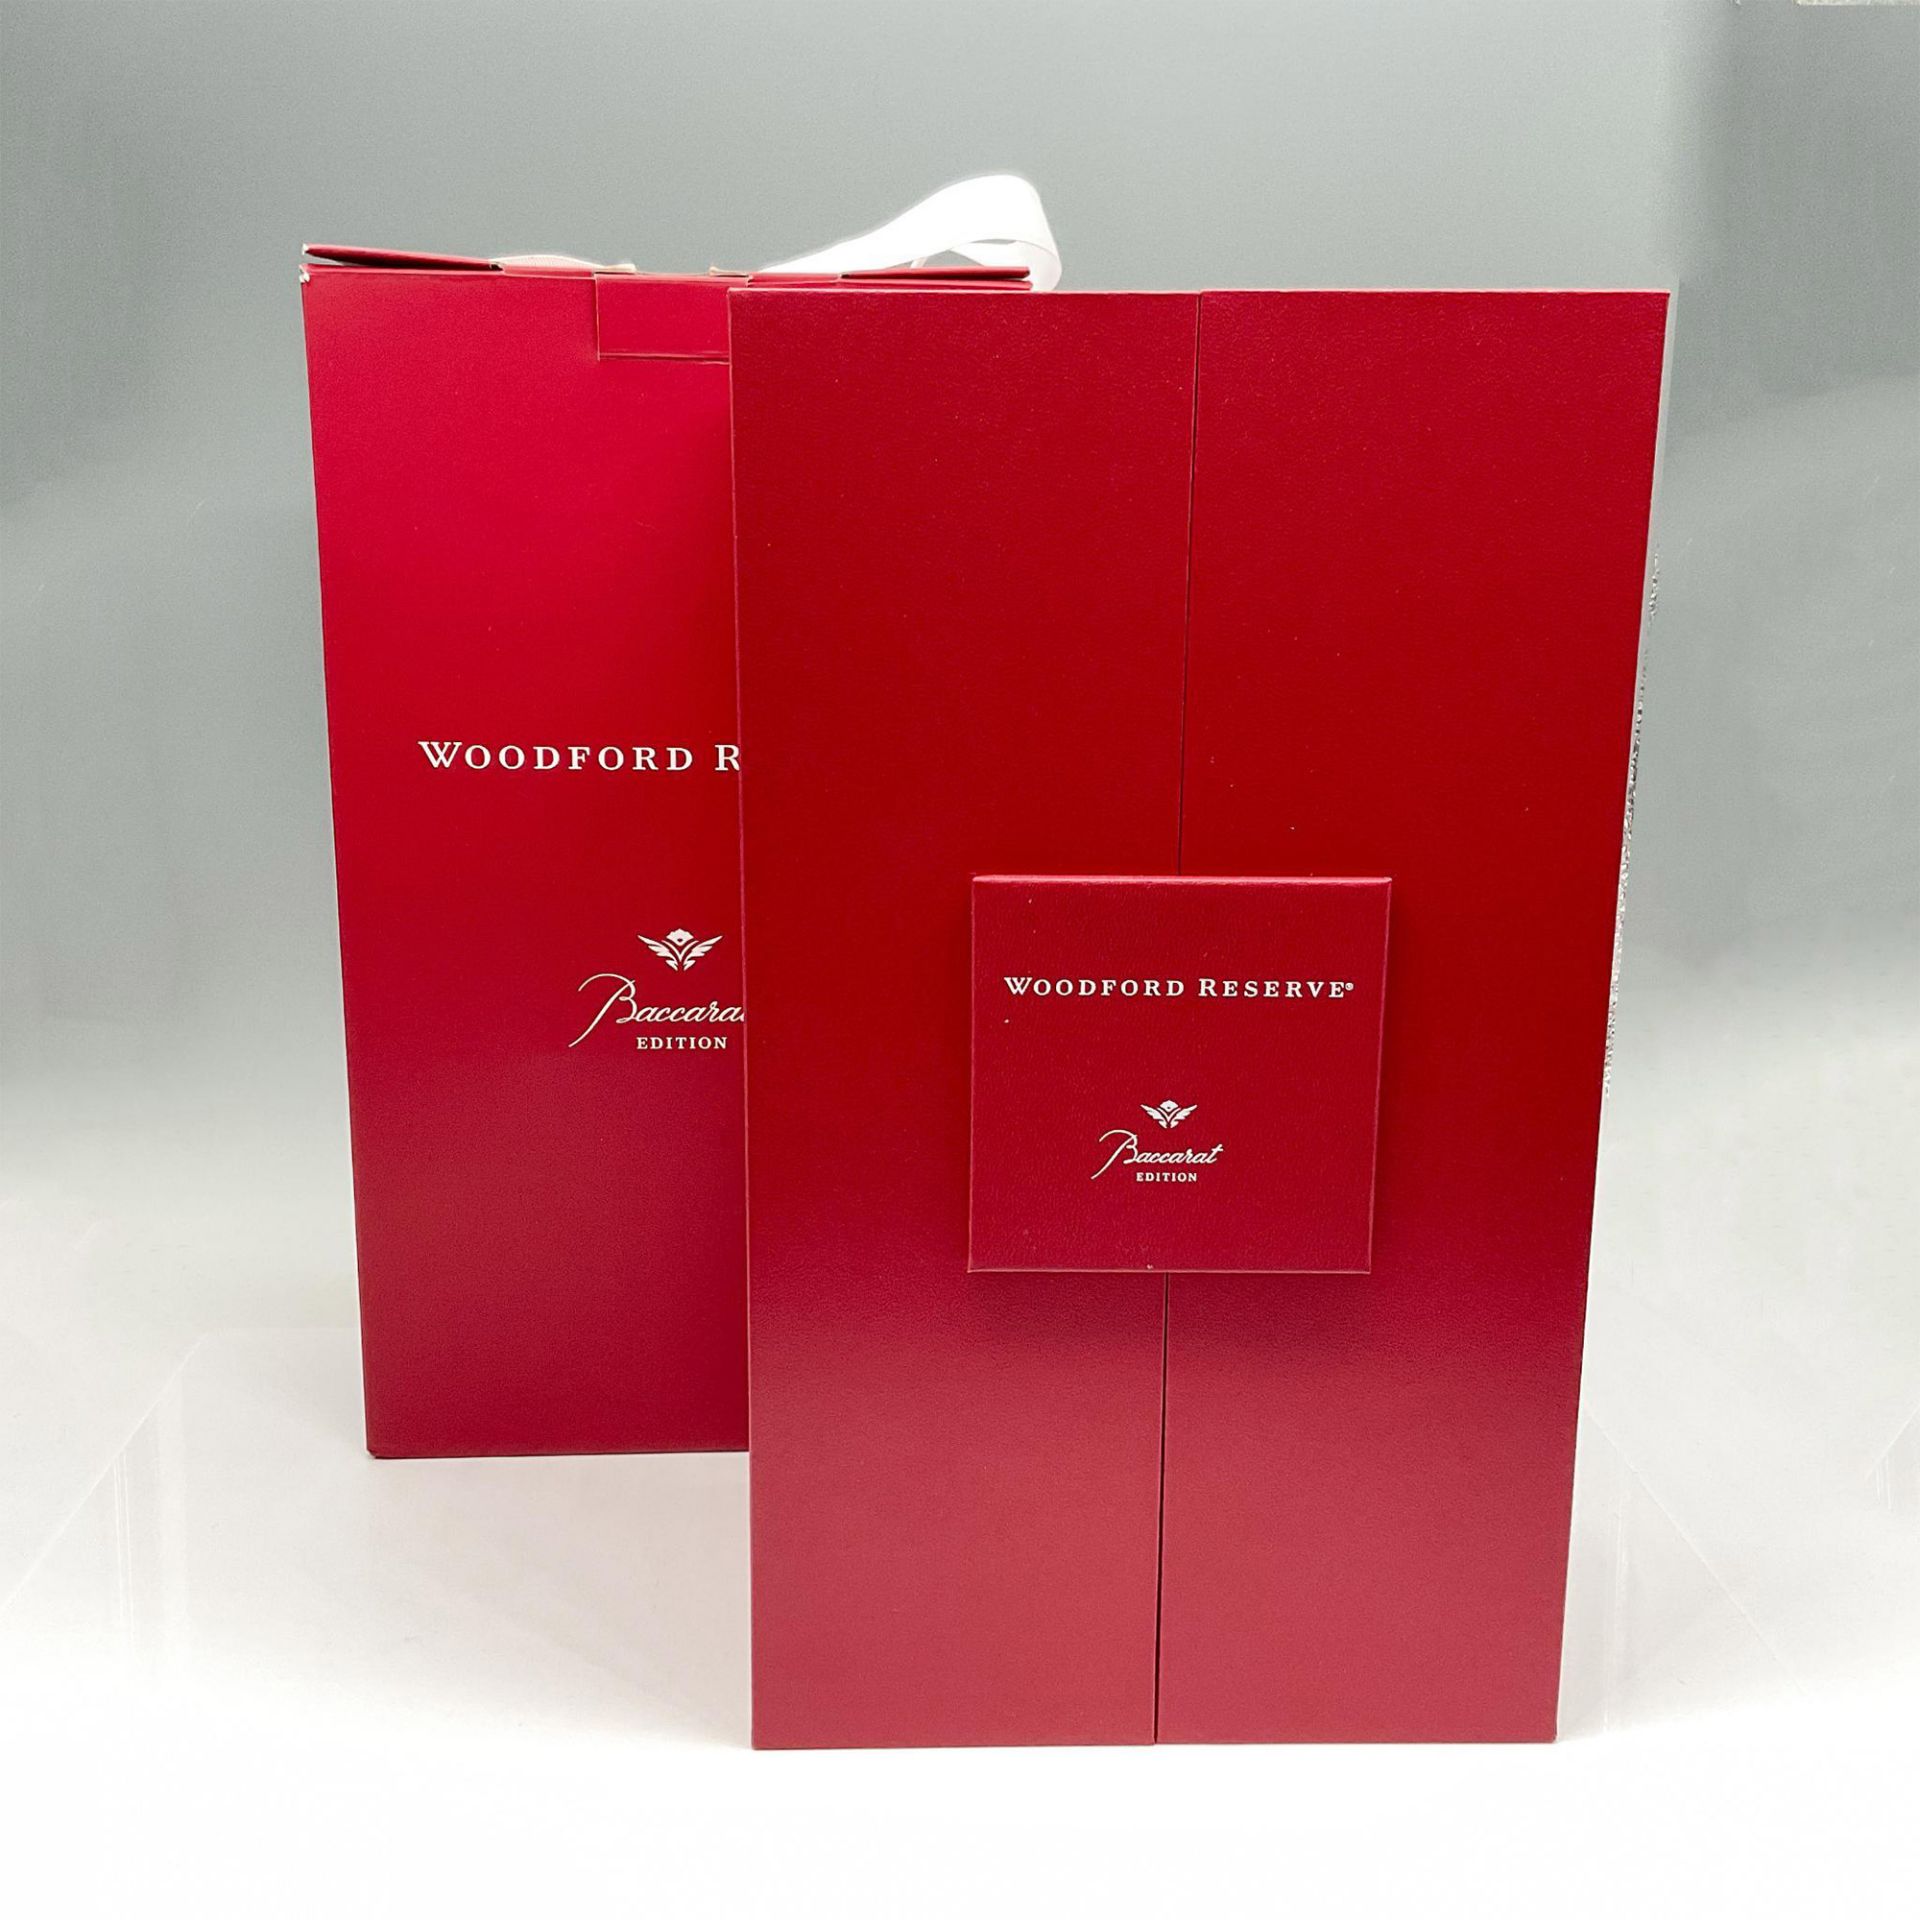 Woodford Reserve Baccarat Edition Kentucky Bourbon Whiskey - Image 5 of 5